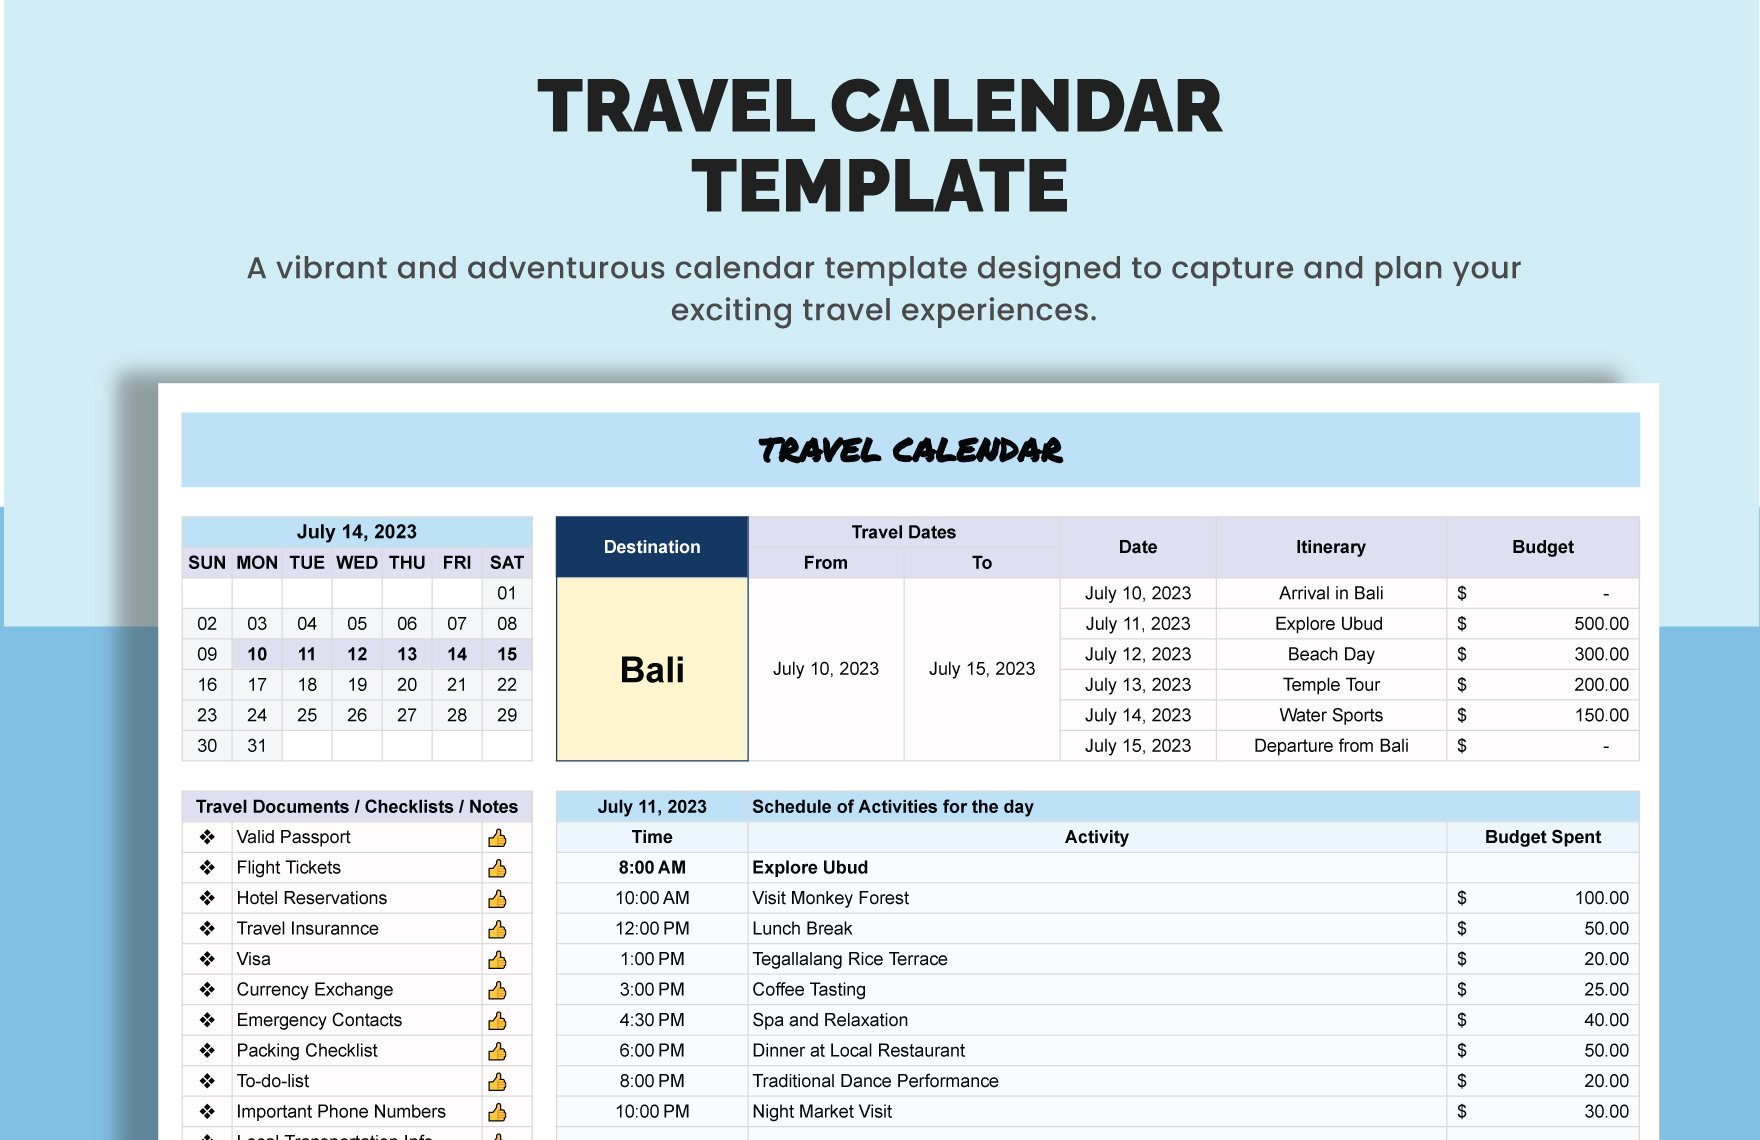 Travel Calendar Template Download in Excel, Google Sheets